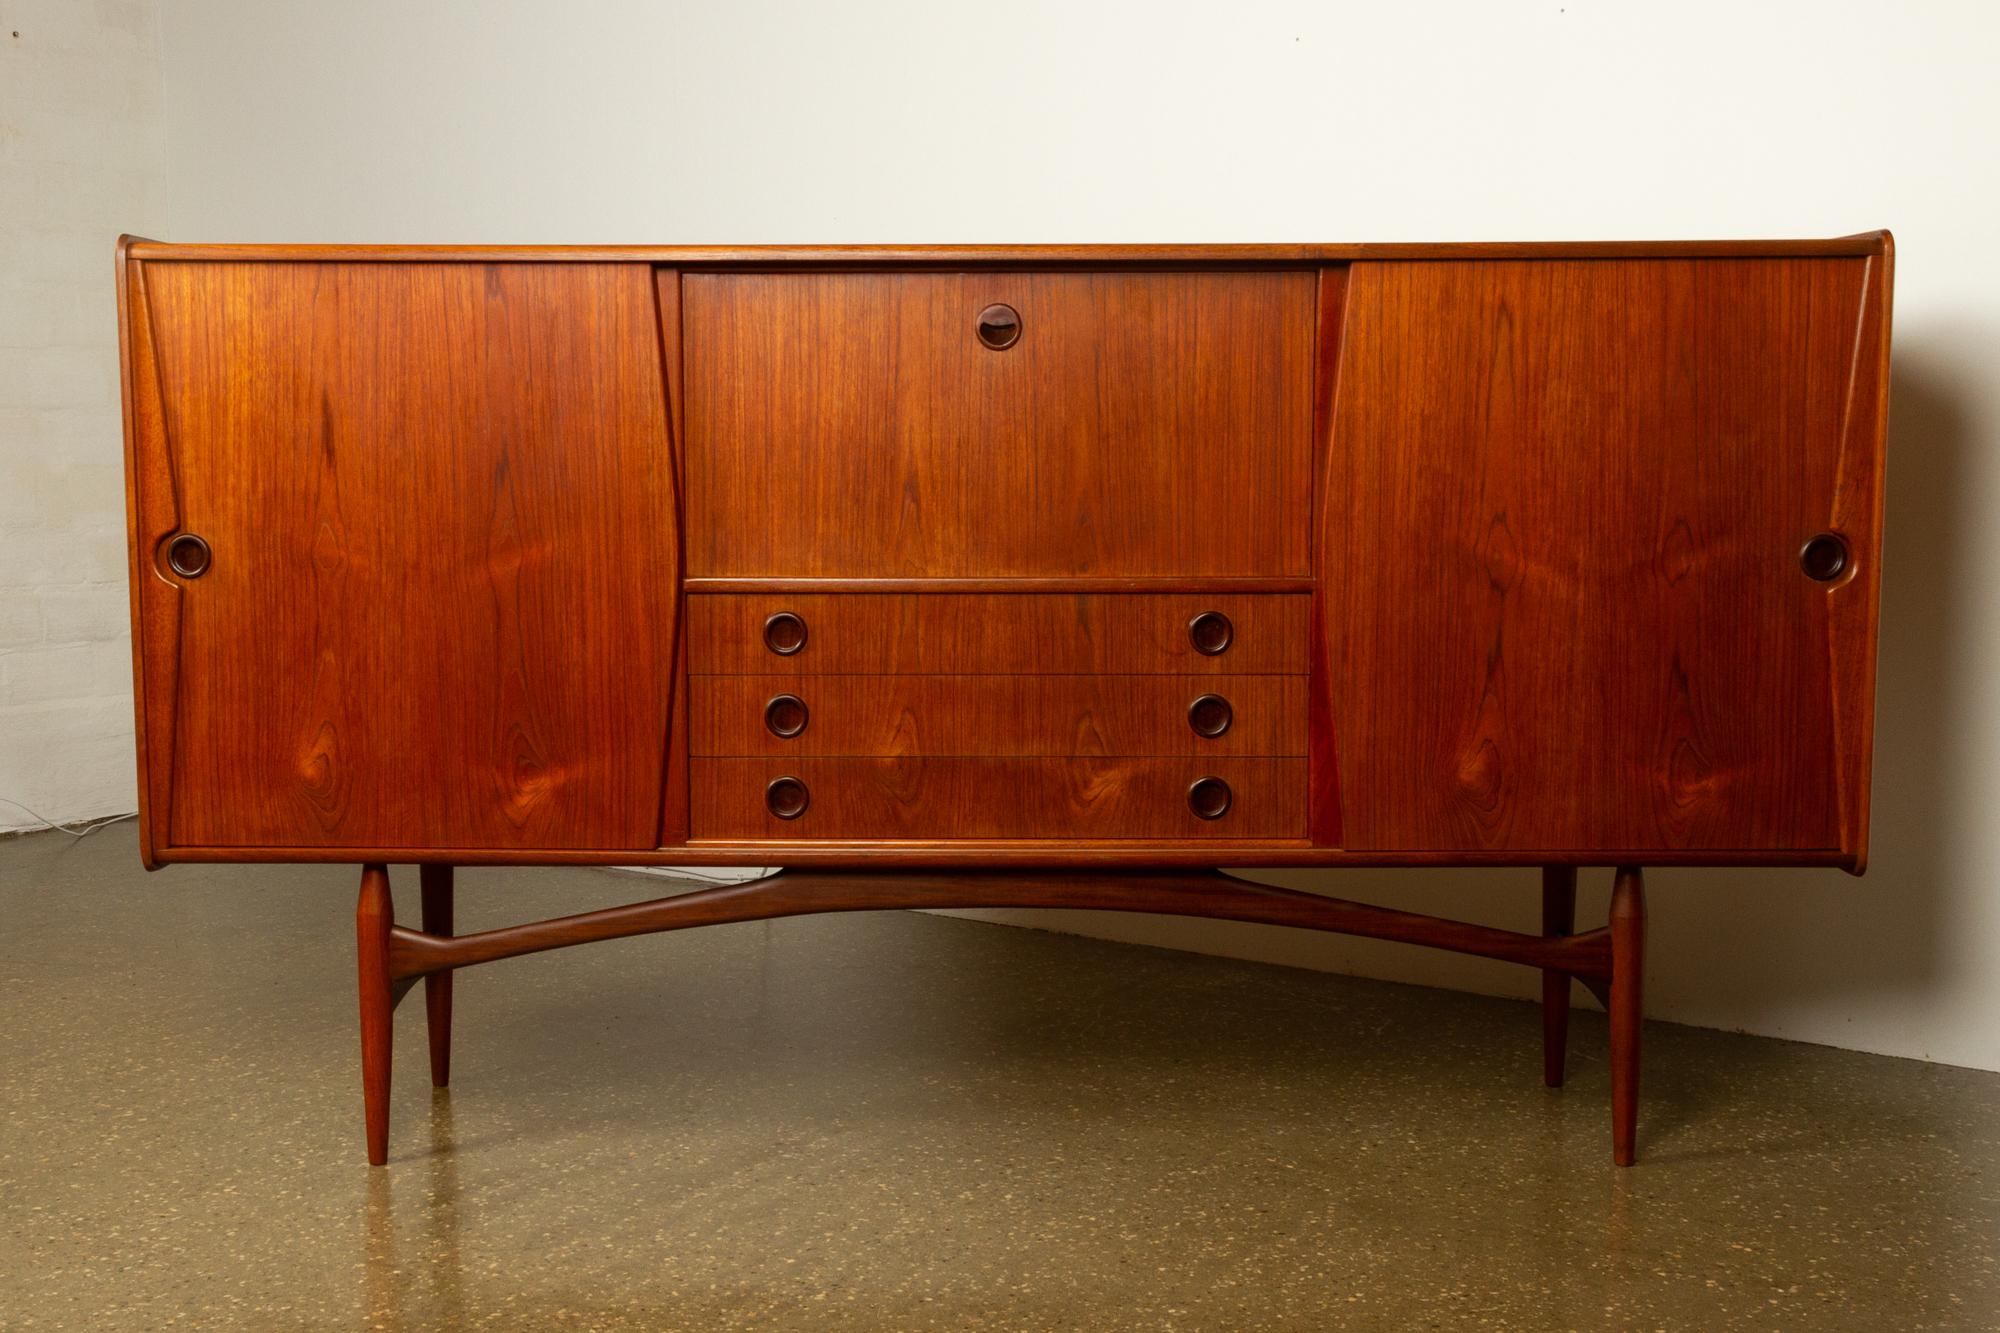 Vintage Danish teak credenza, 1960s.

Very attractive Danish Mid-Century Modern credenza / sideboard in beautiful warm and golden teak veneer. Sculptural shapes and frame. High degree of quality and craftsmanship. Many lovely details and joints.